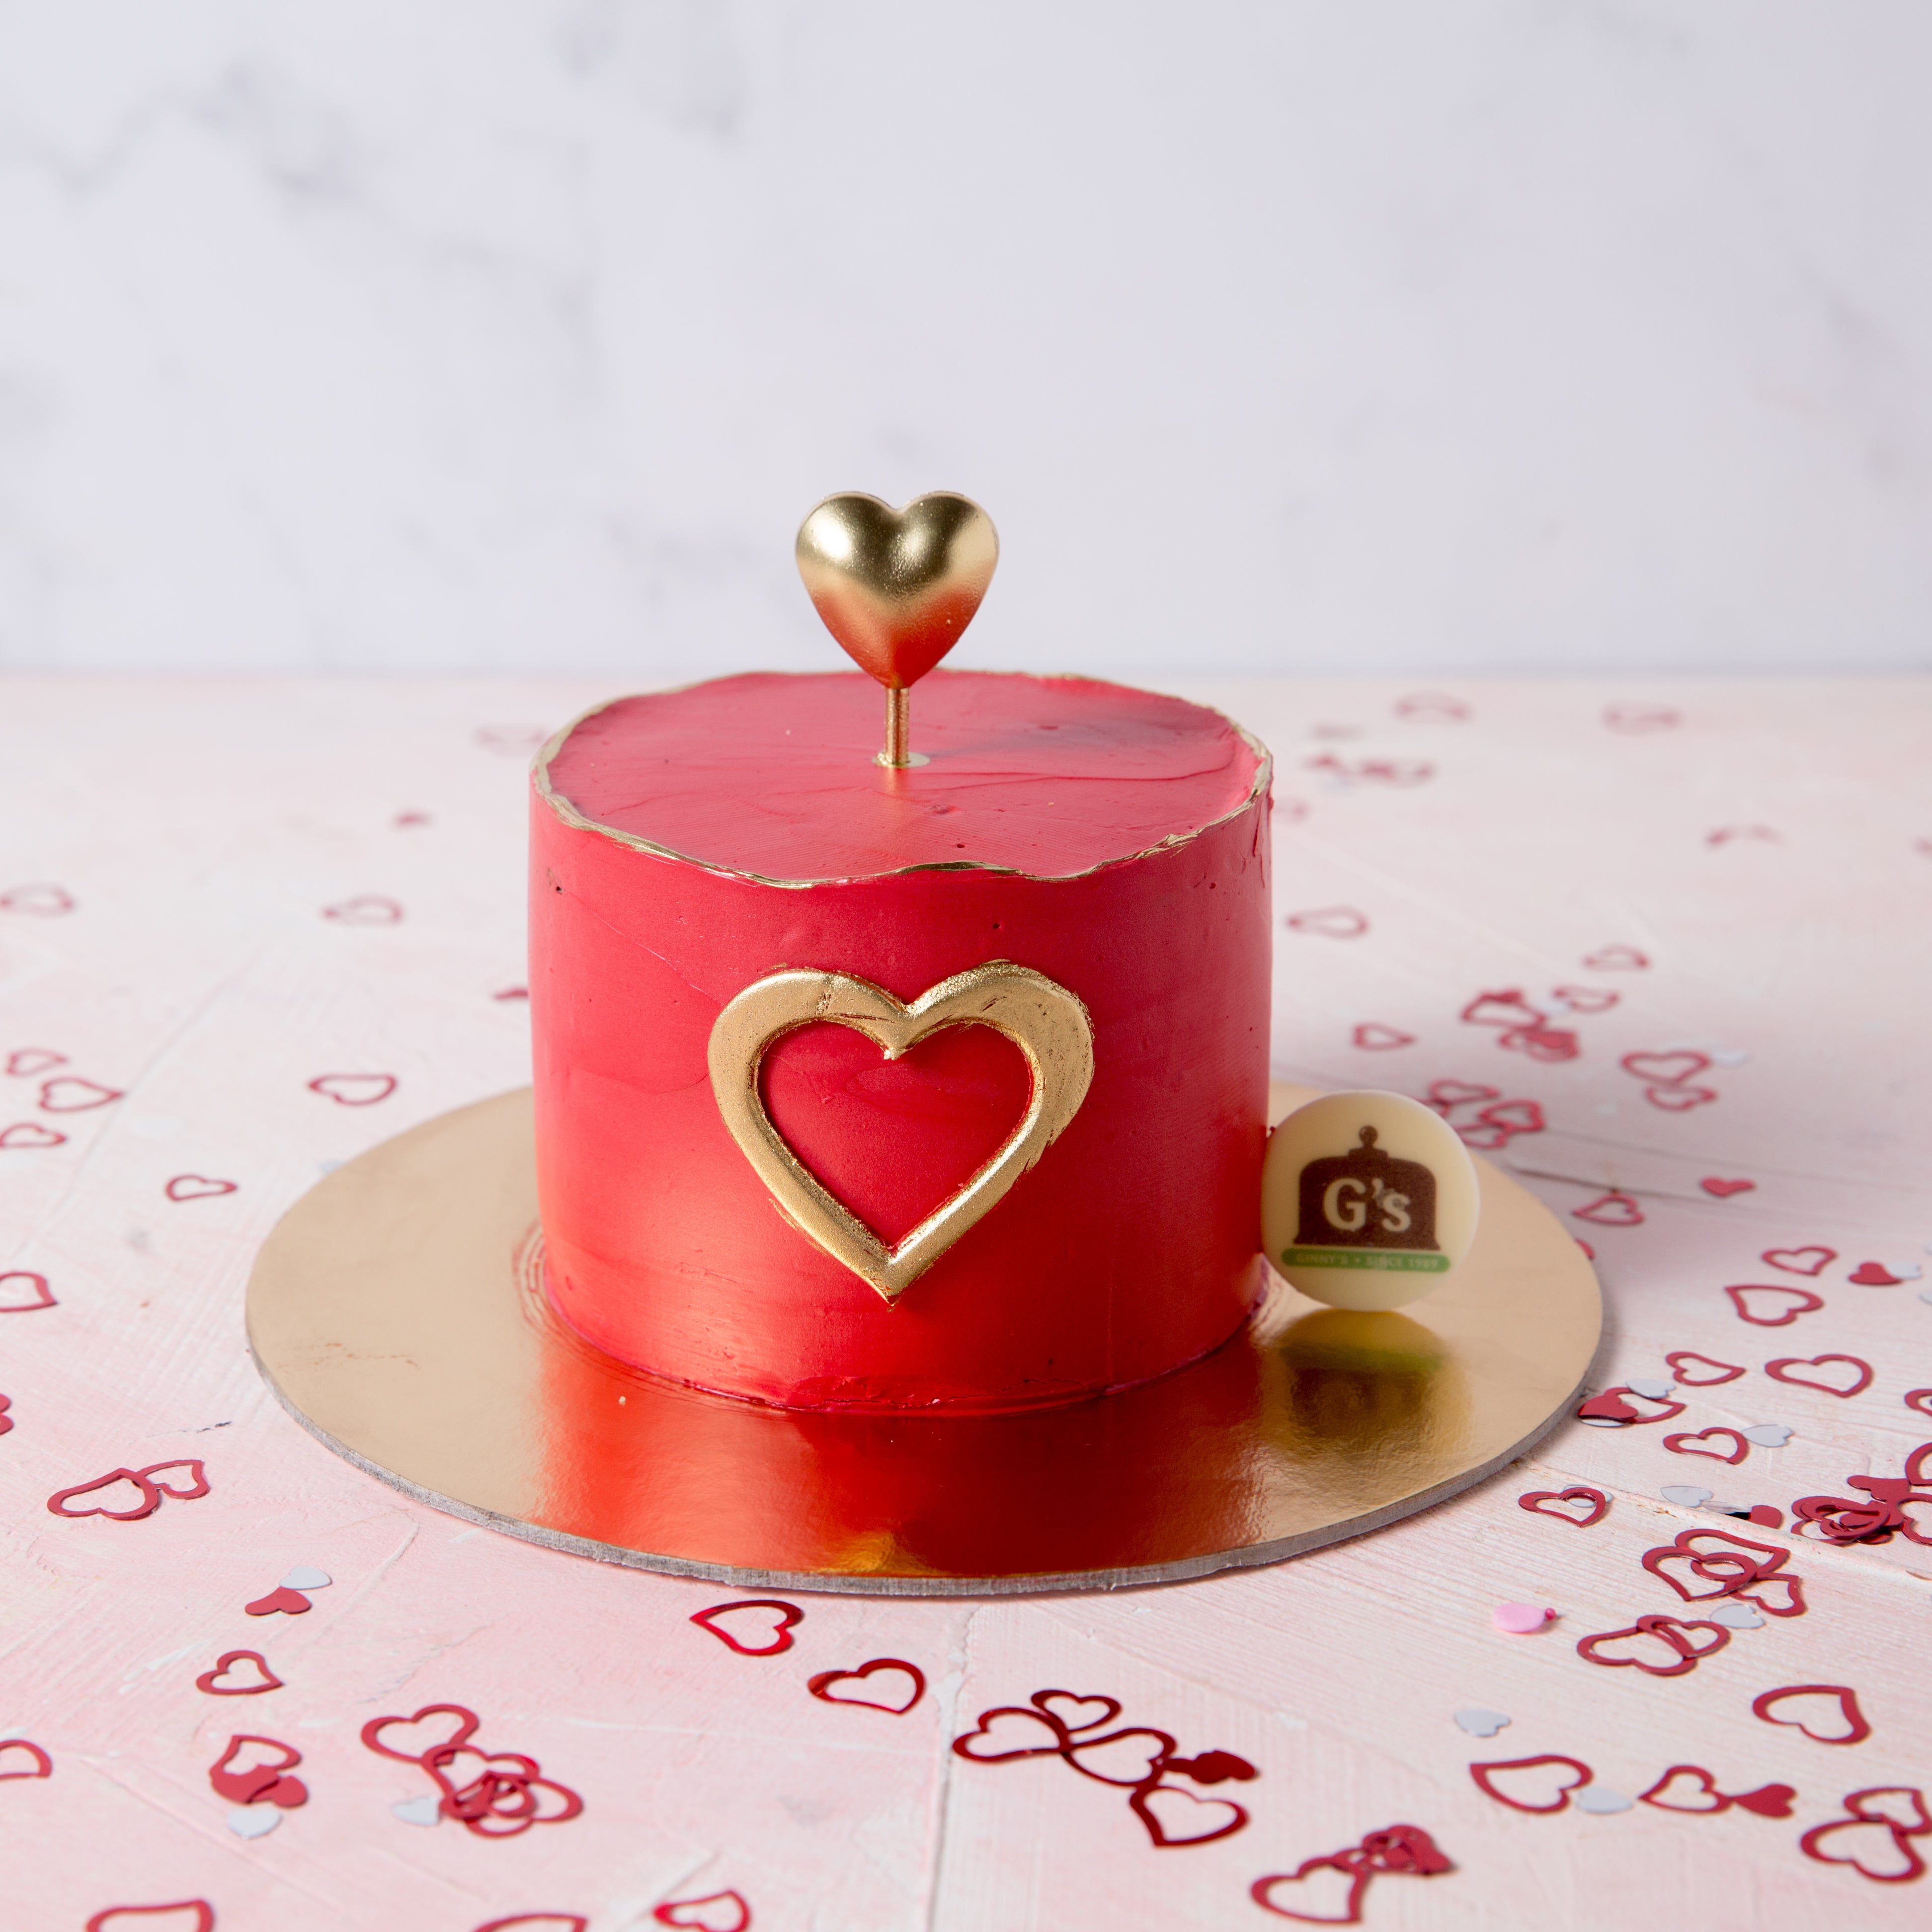 This Might Be The Easiest Way To Make A Heart-Shaped Valentine's Day Cake